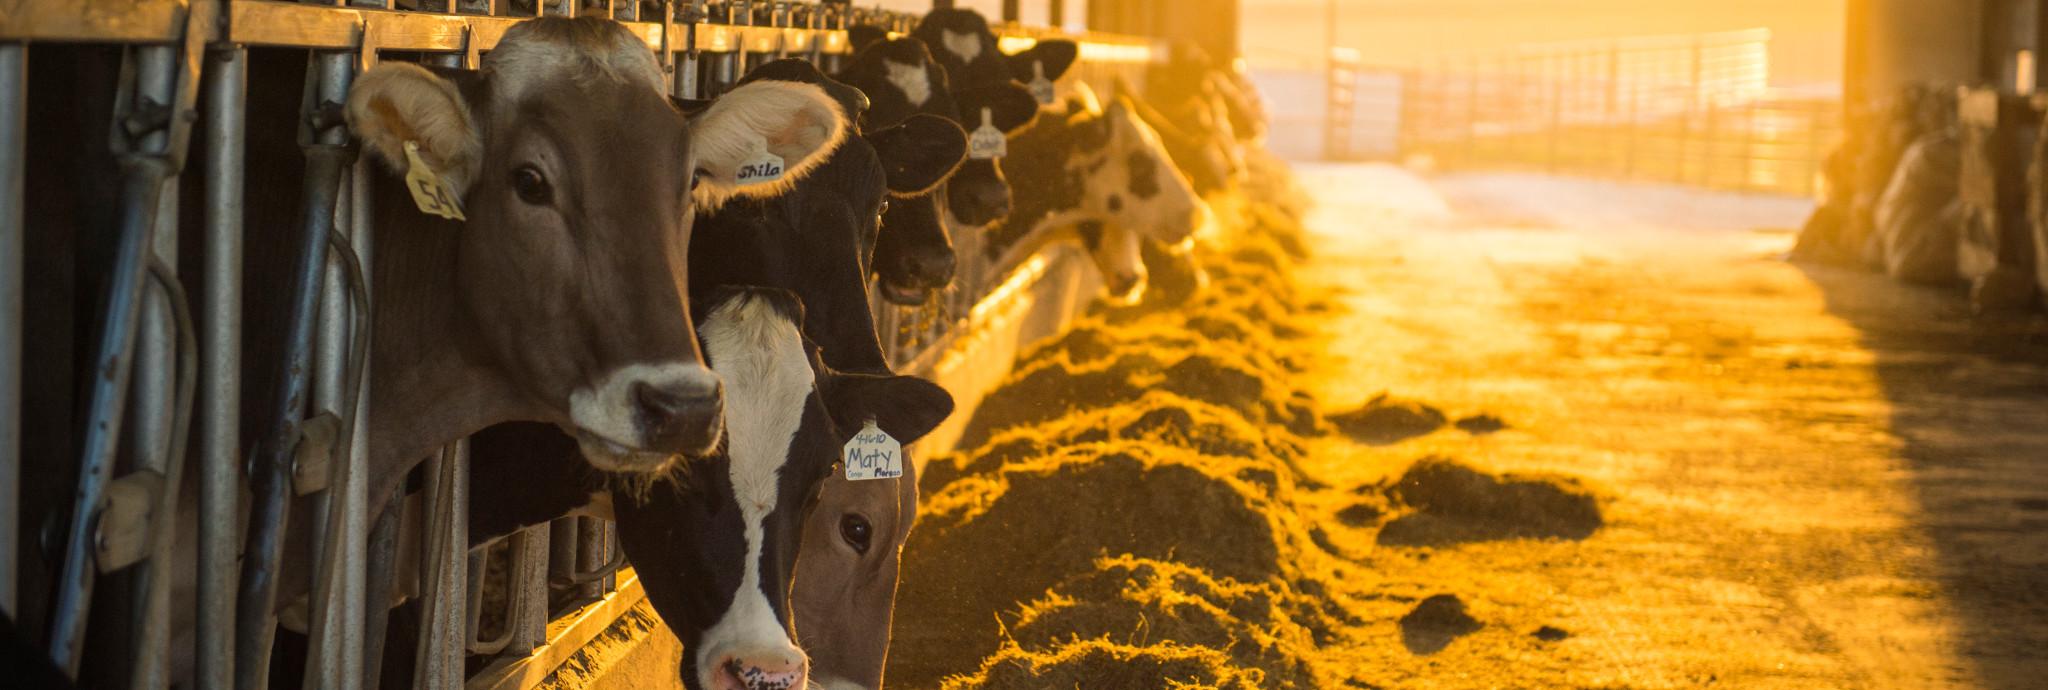 Cows in a barn with their heads through feeders looking at the camera with sunshine coming in from outside the aisle